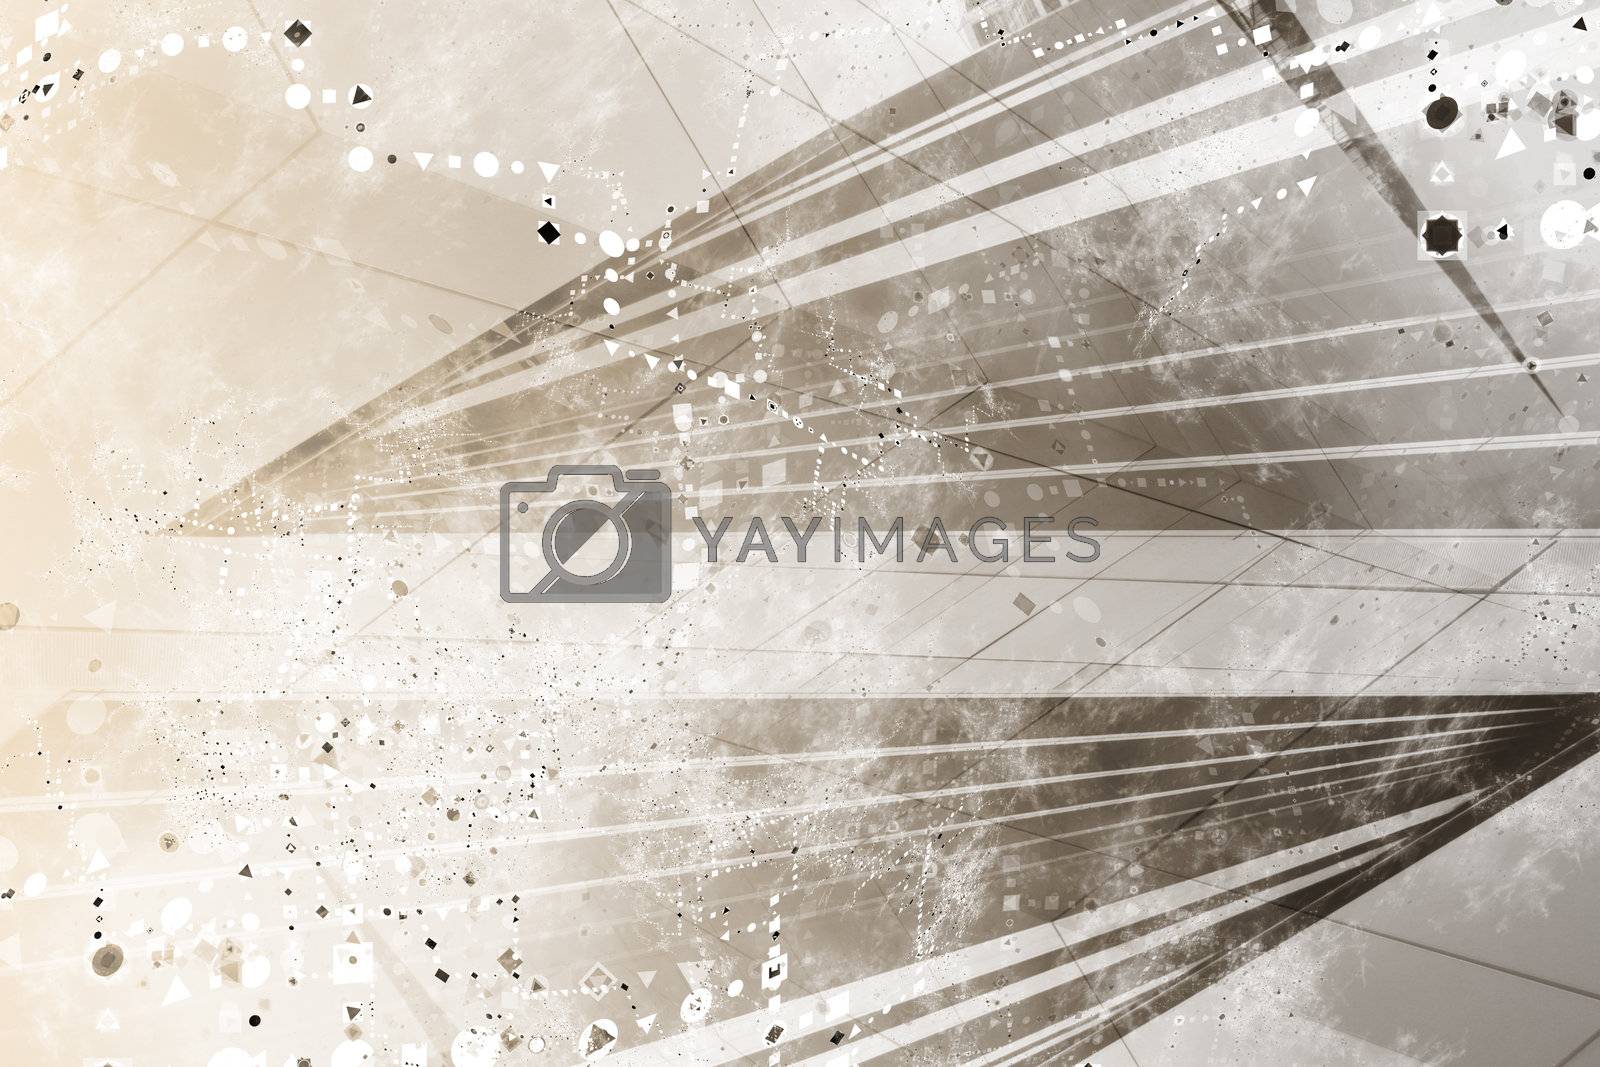 Royalty free image of Generic Grunge Futuristic Abstract Background by kentoh